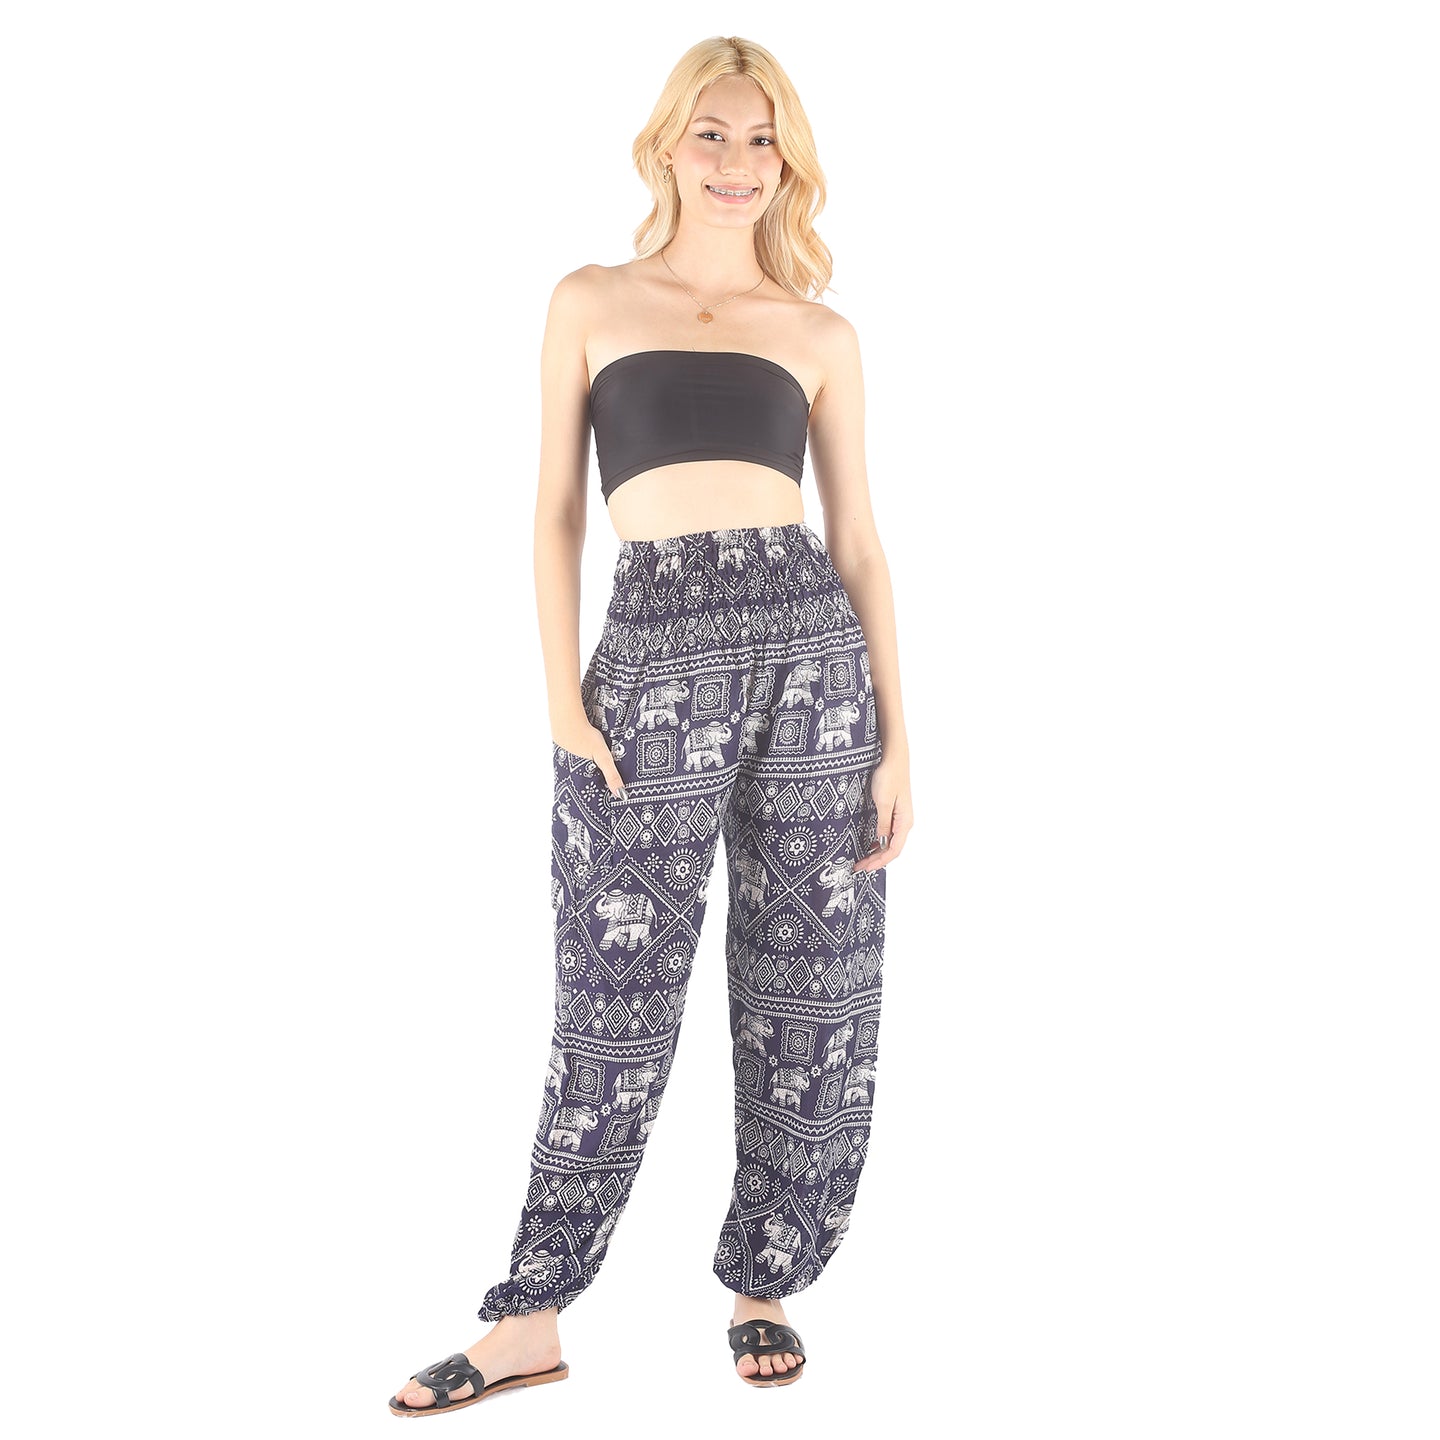 Elephant Aztec Cotton Men's Harem Pants in Navy. Free Shipping for all  orders over $60.